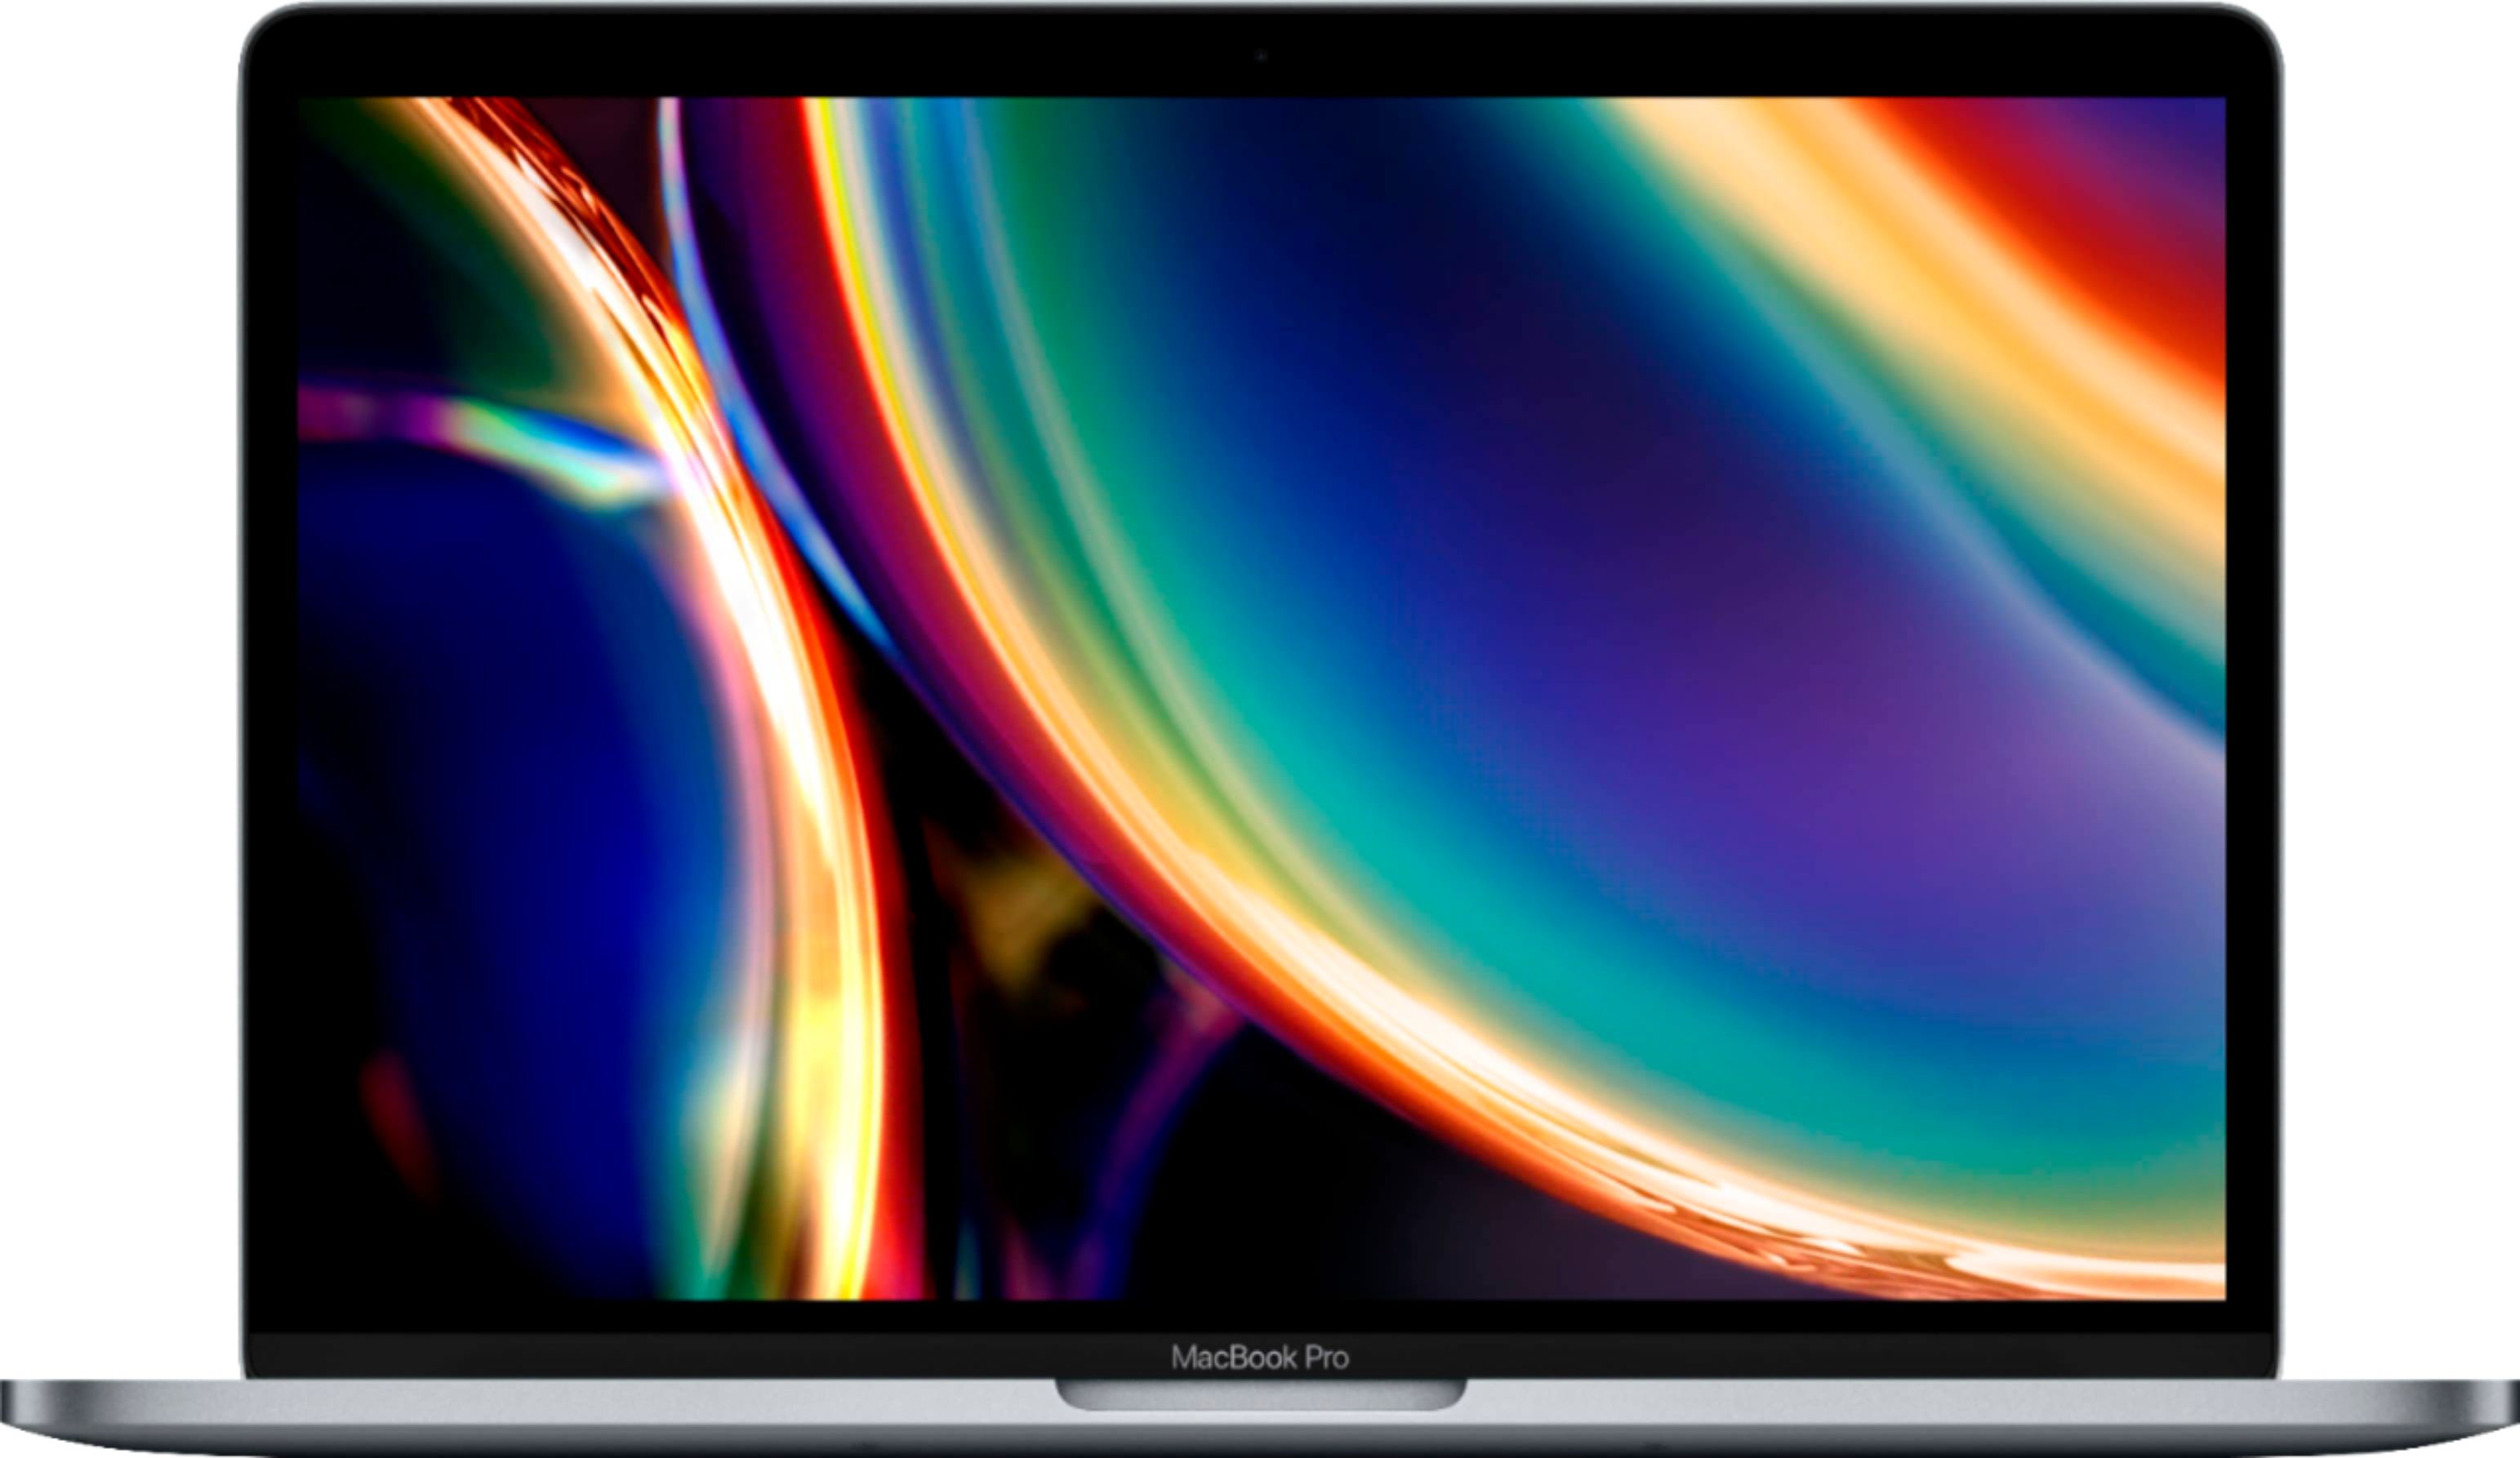 Apple MacBook Pro 13″ Certified Refurbished – Intel Core i5 2.0GHz – Touch Bar/ID – 16GB Memory – 1TB SSD (2020) – Space Gray